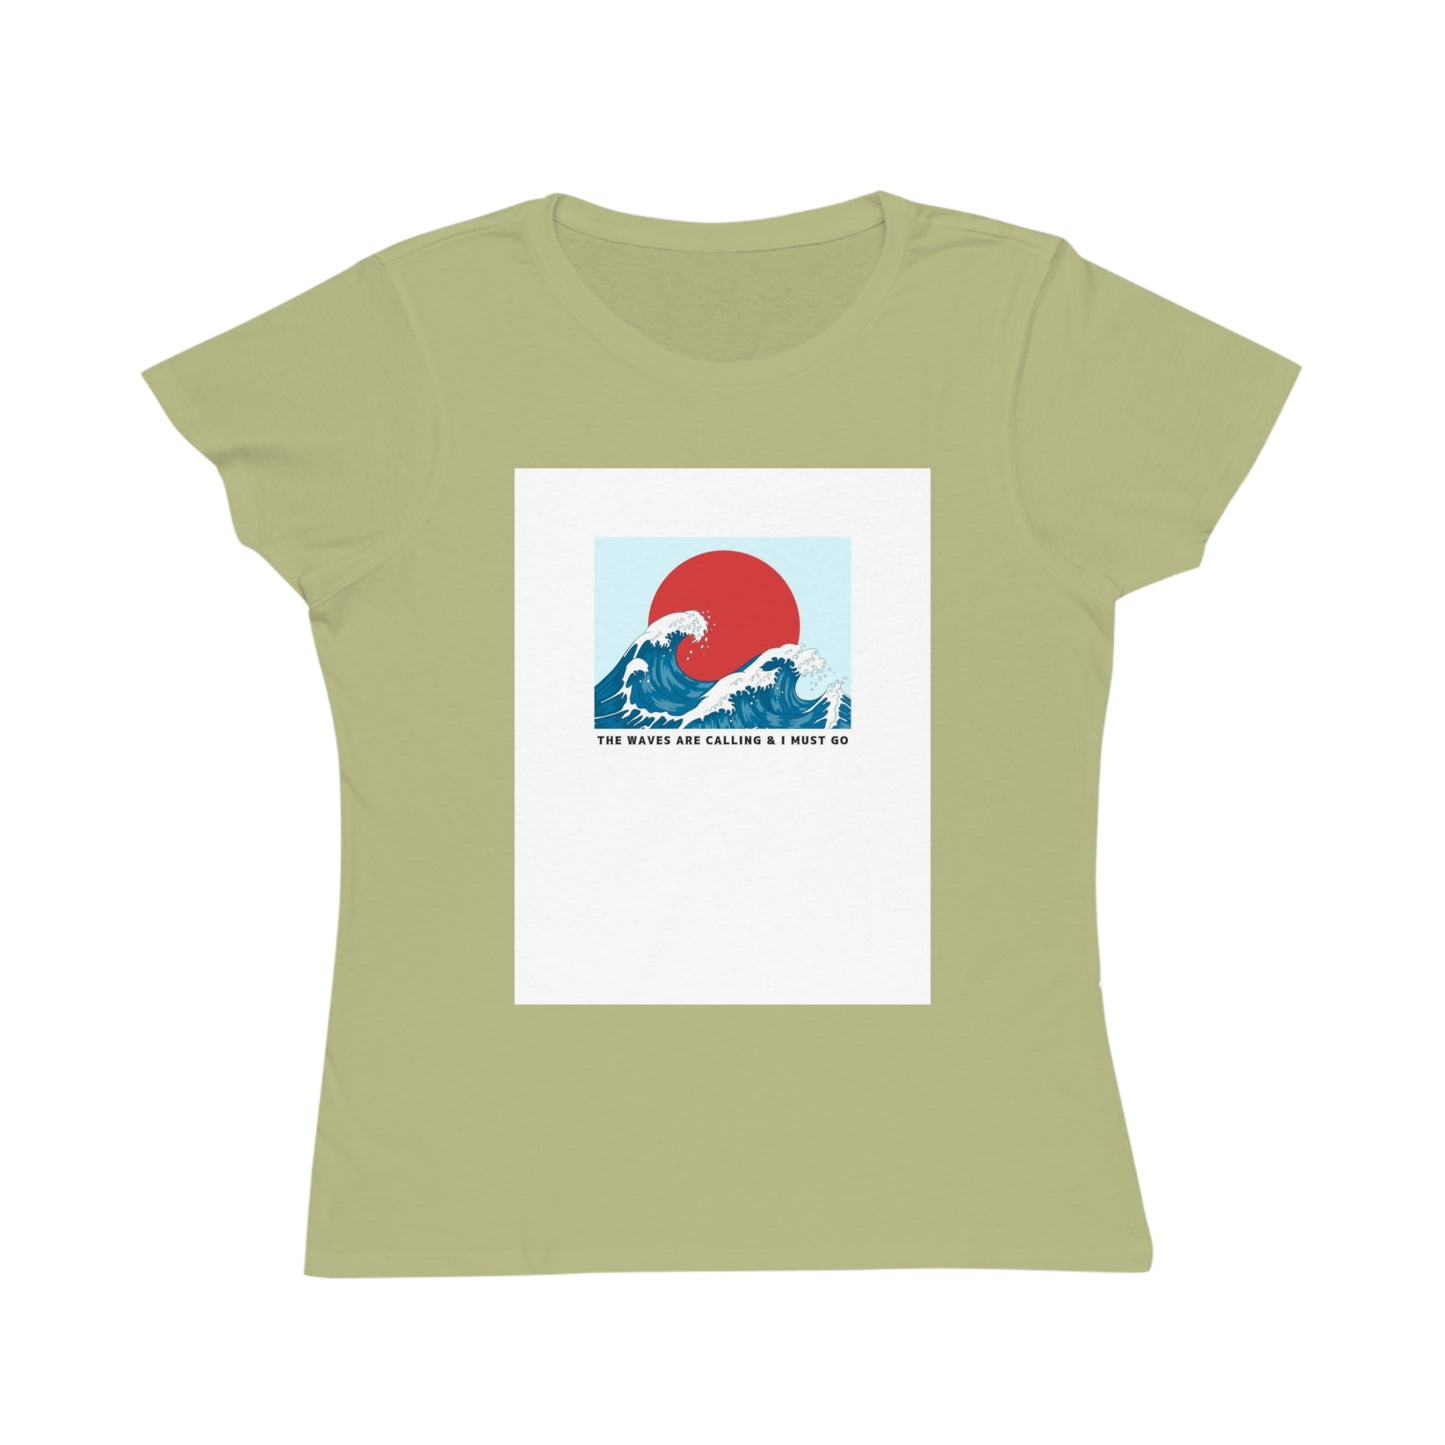 "The Waves are Calling" Organic Women's Classic T-Shirt*